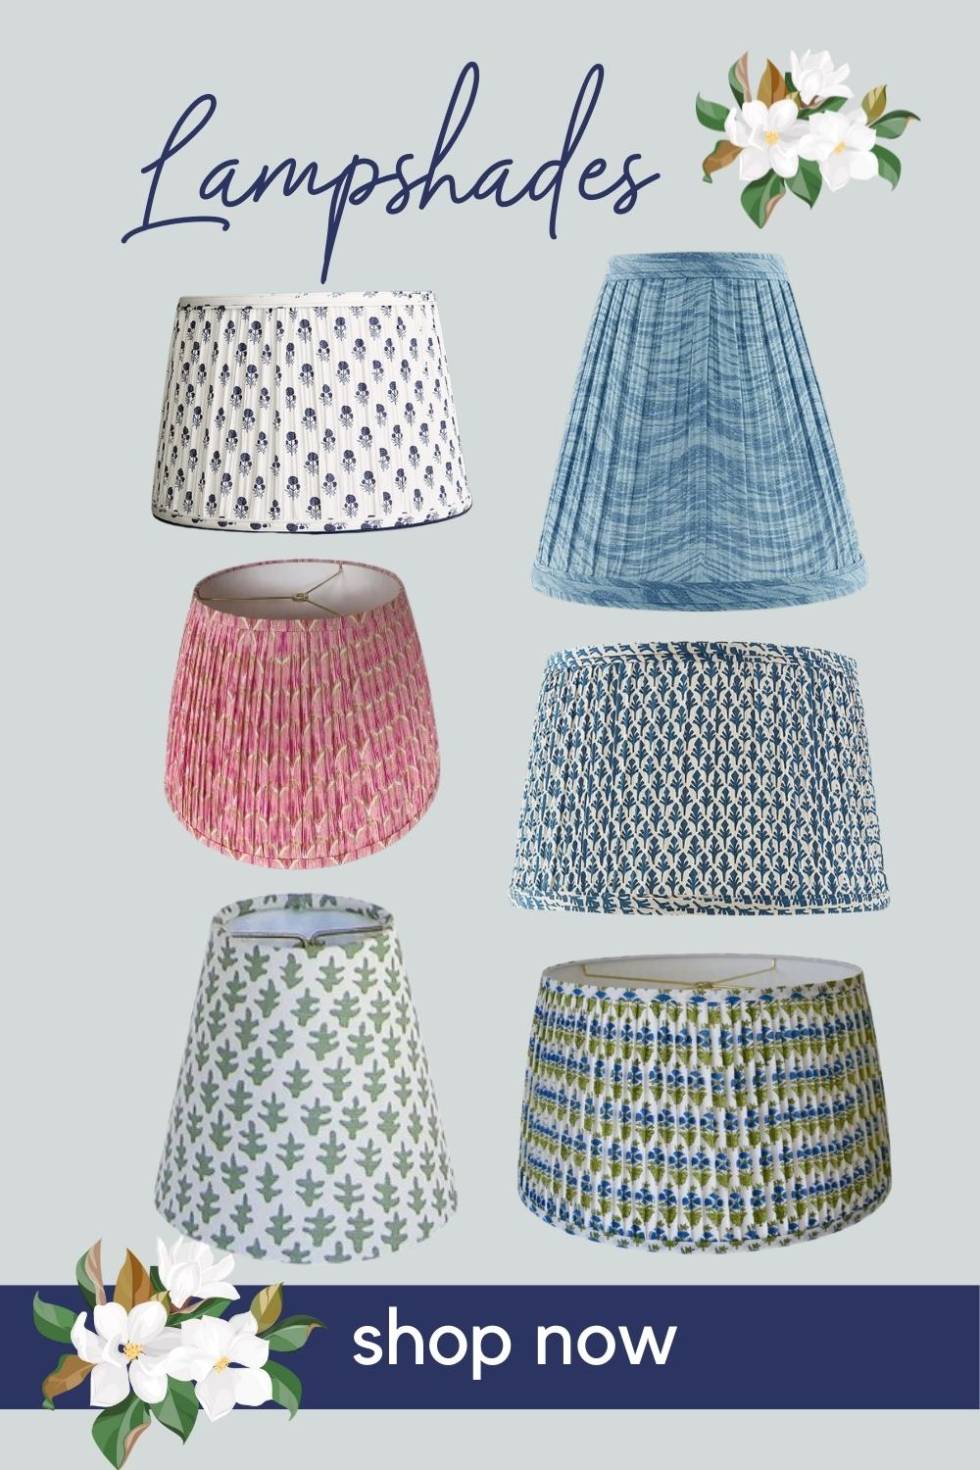 Pleated Lampshades | Sconce Lampshades | Chandelier Shades